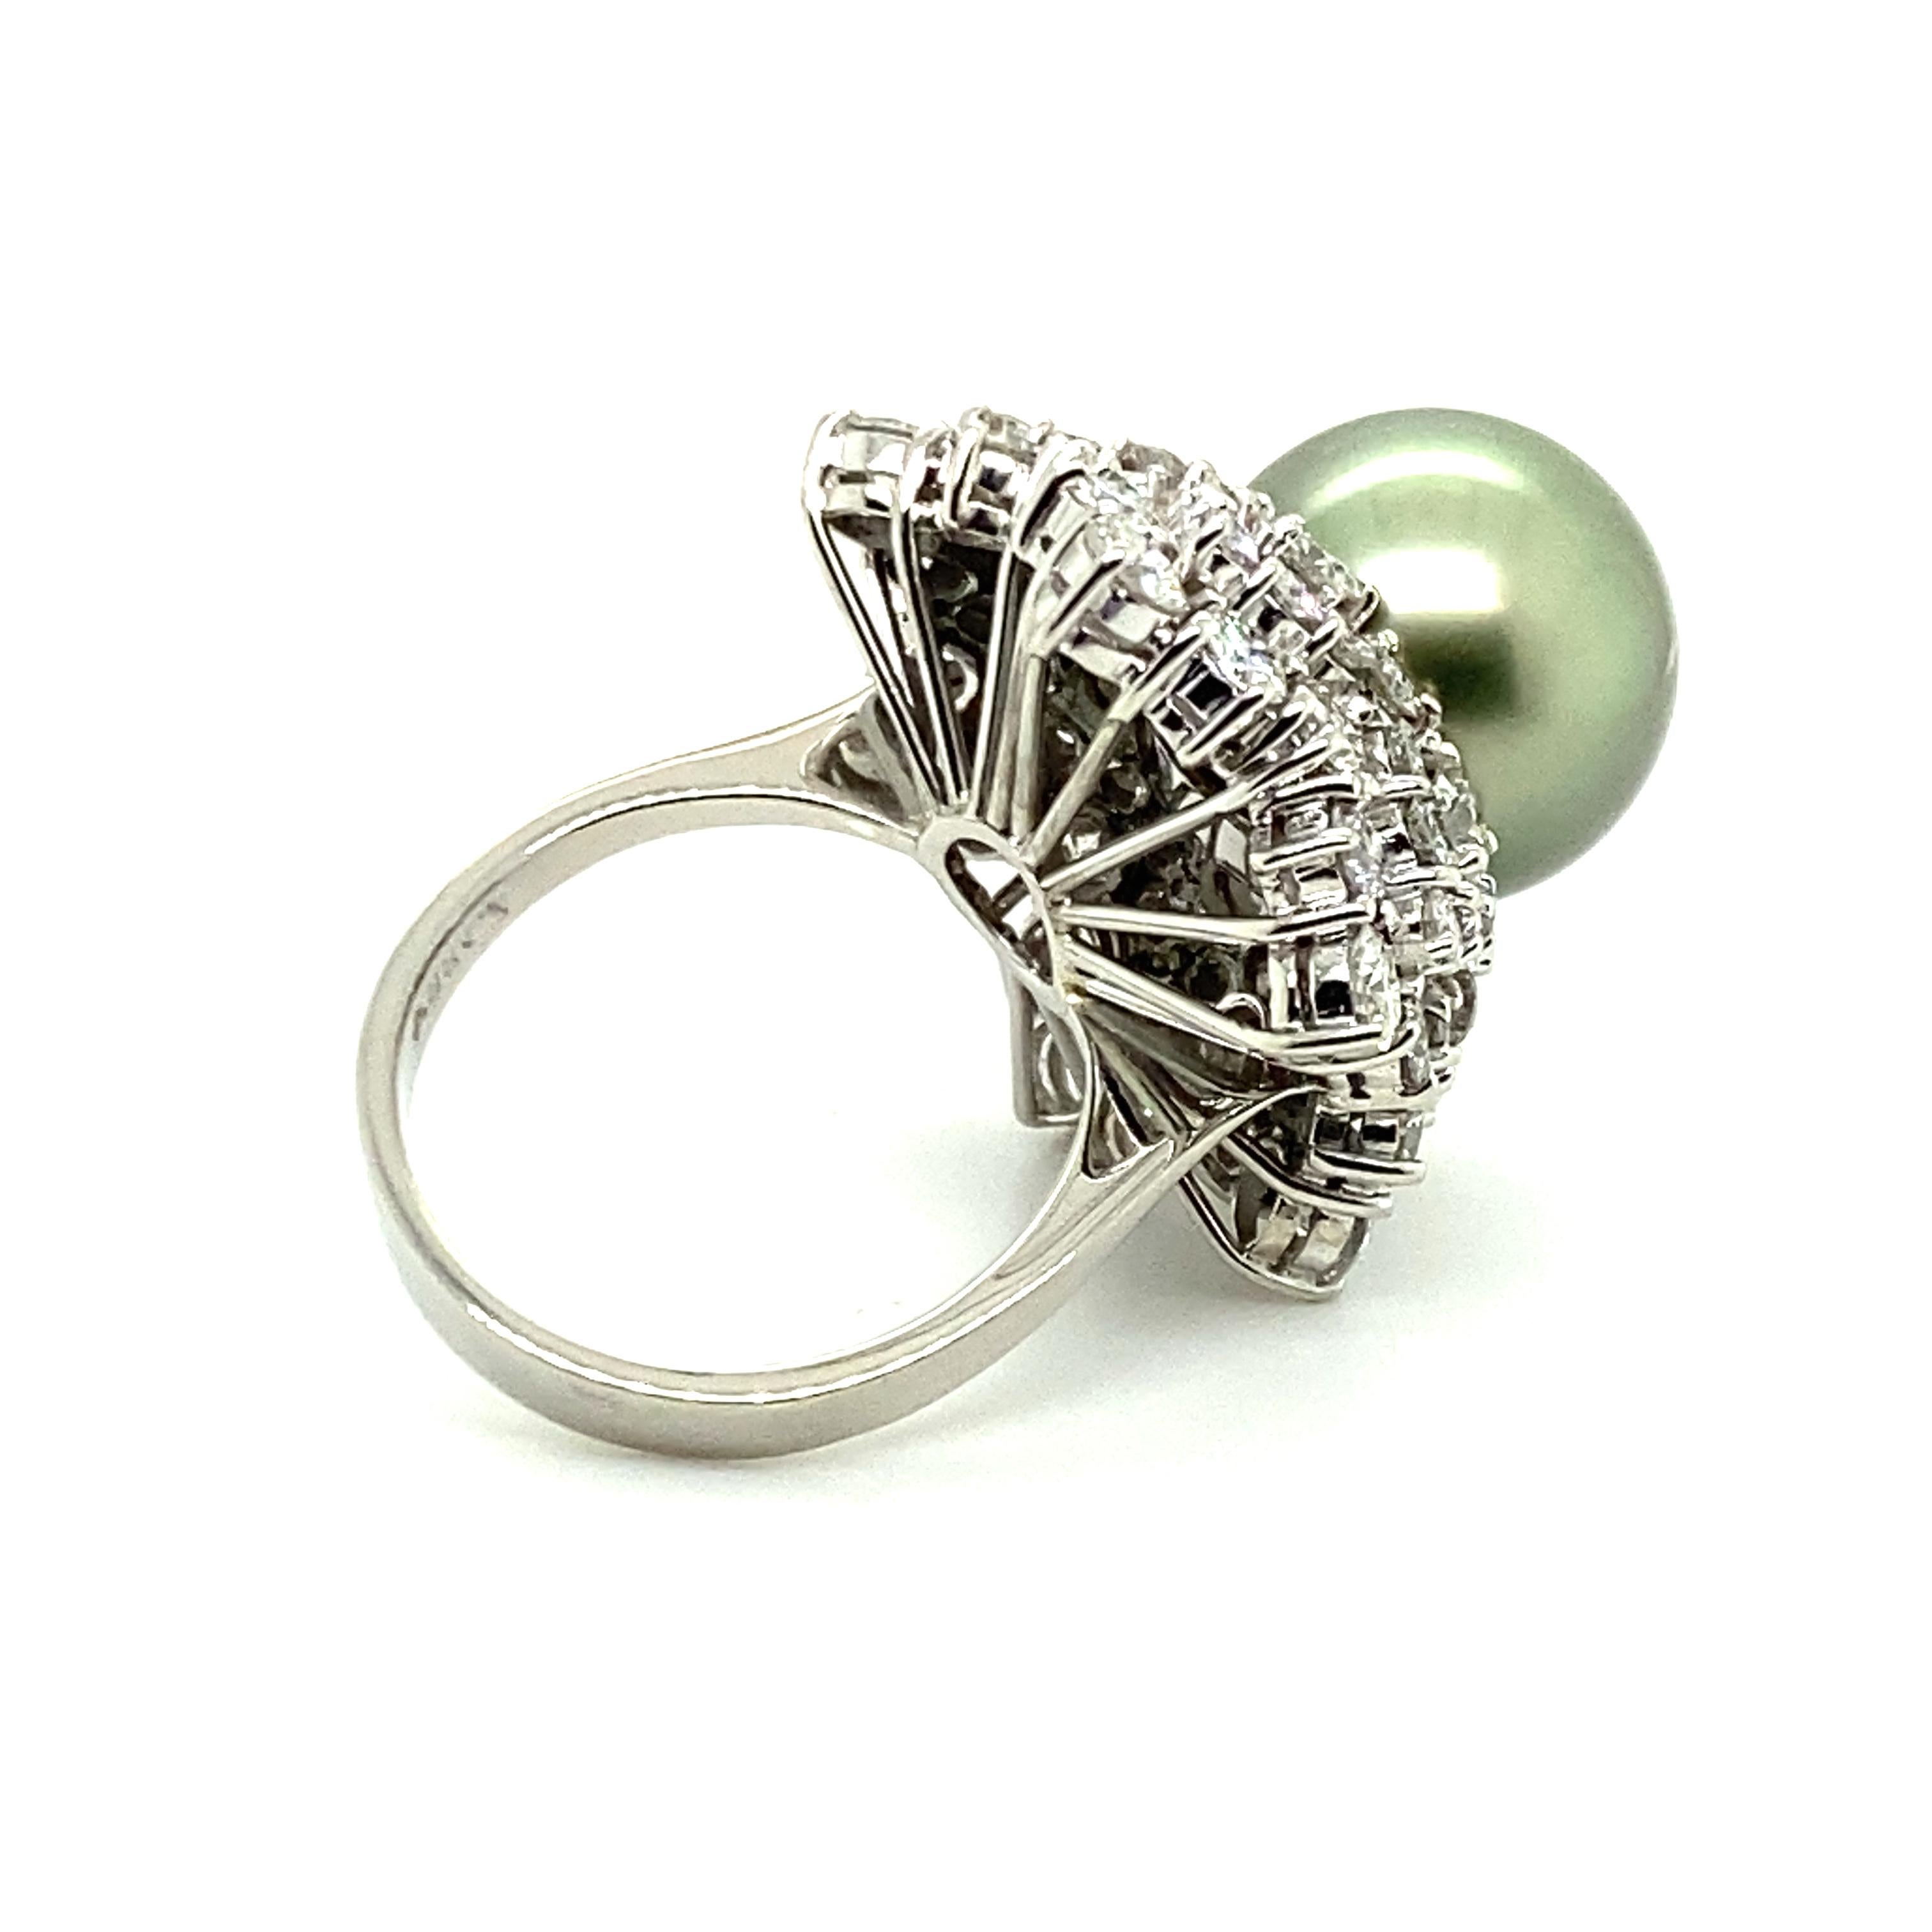 Tahitian Cultured Pearl and Diamond Ring in Platinum 950 For Sale 6